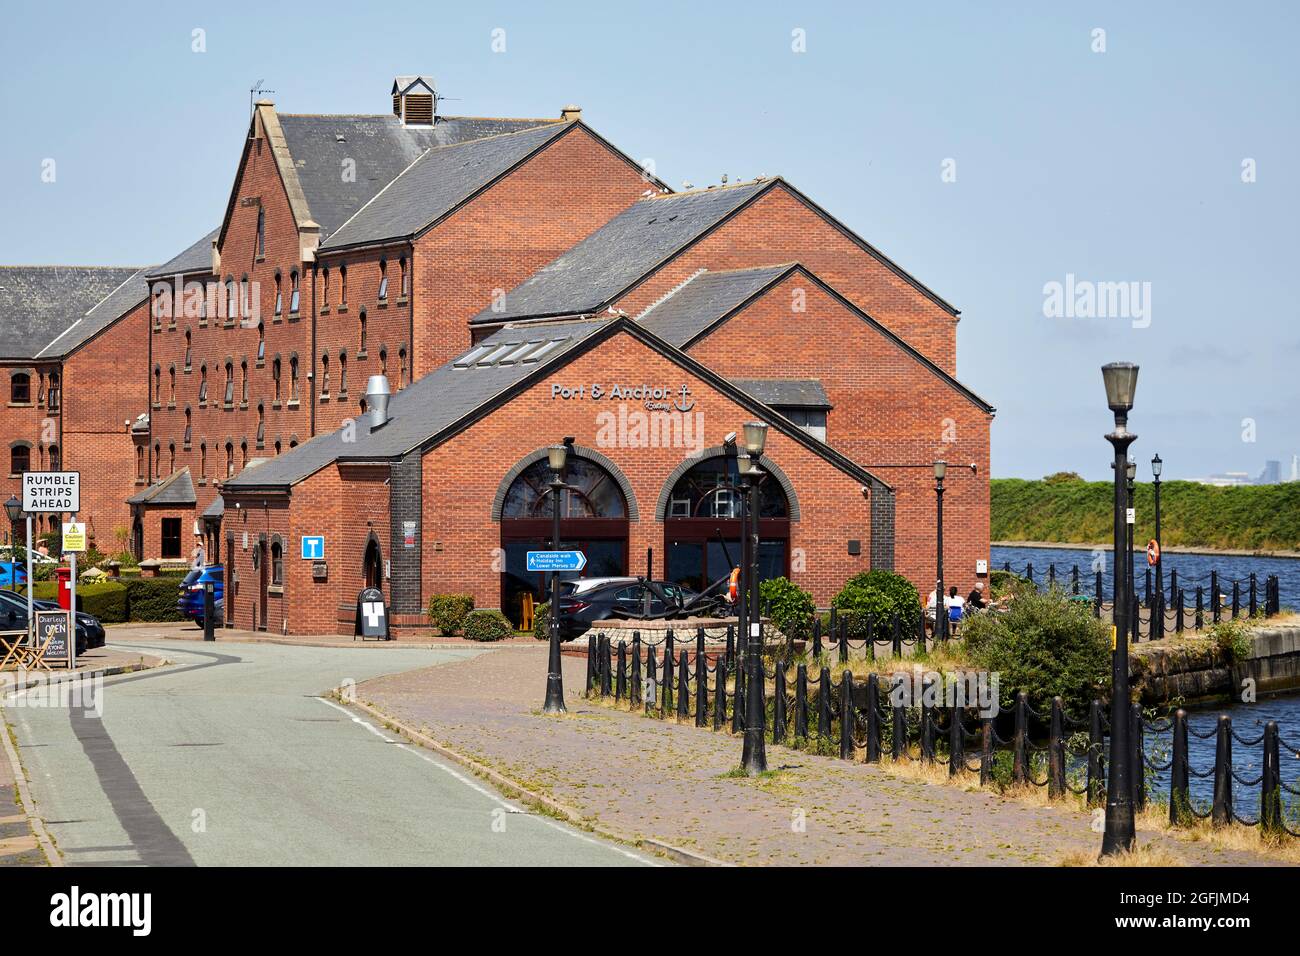 Port & Anchor Eatery in the side of the  Manchester Ship Canal 1 S Pier Rd, Ellesmere Port Stock Photo